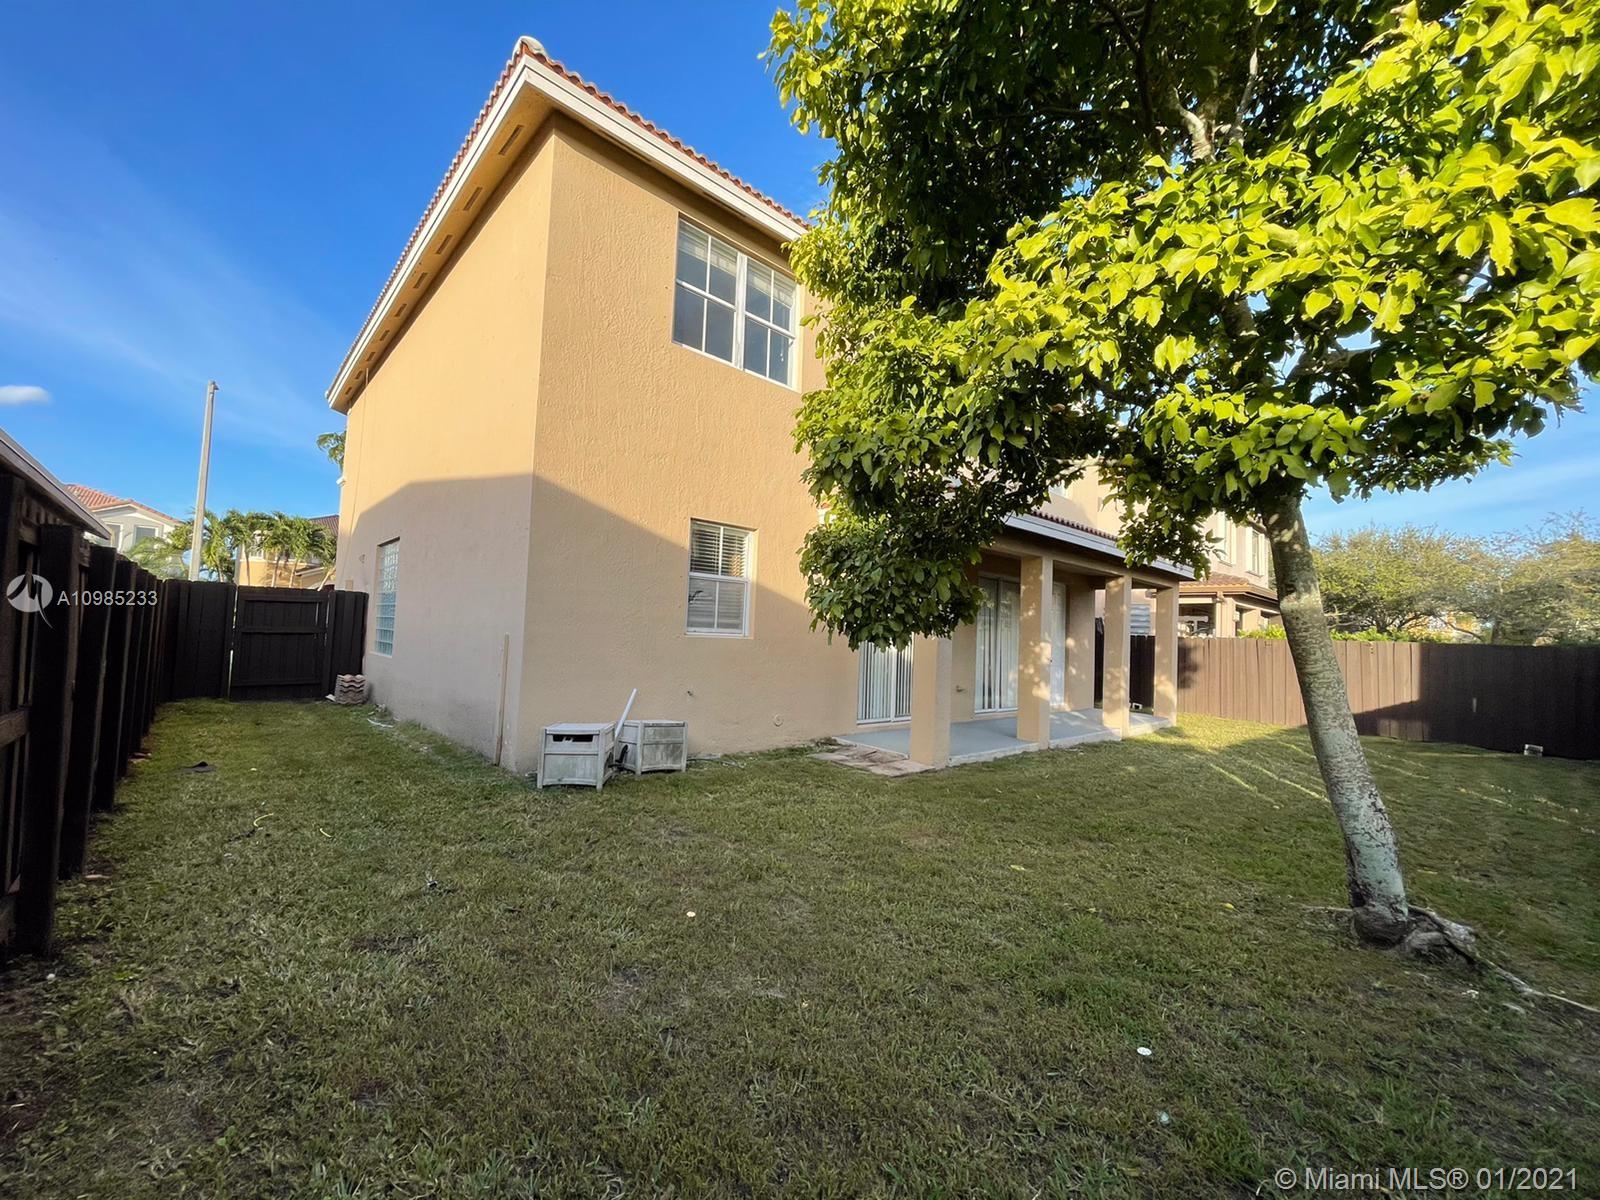 Photo 26 of 14542 10th St in Miami - MLS A10985233